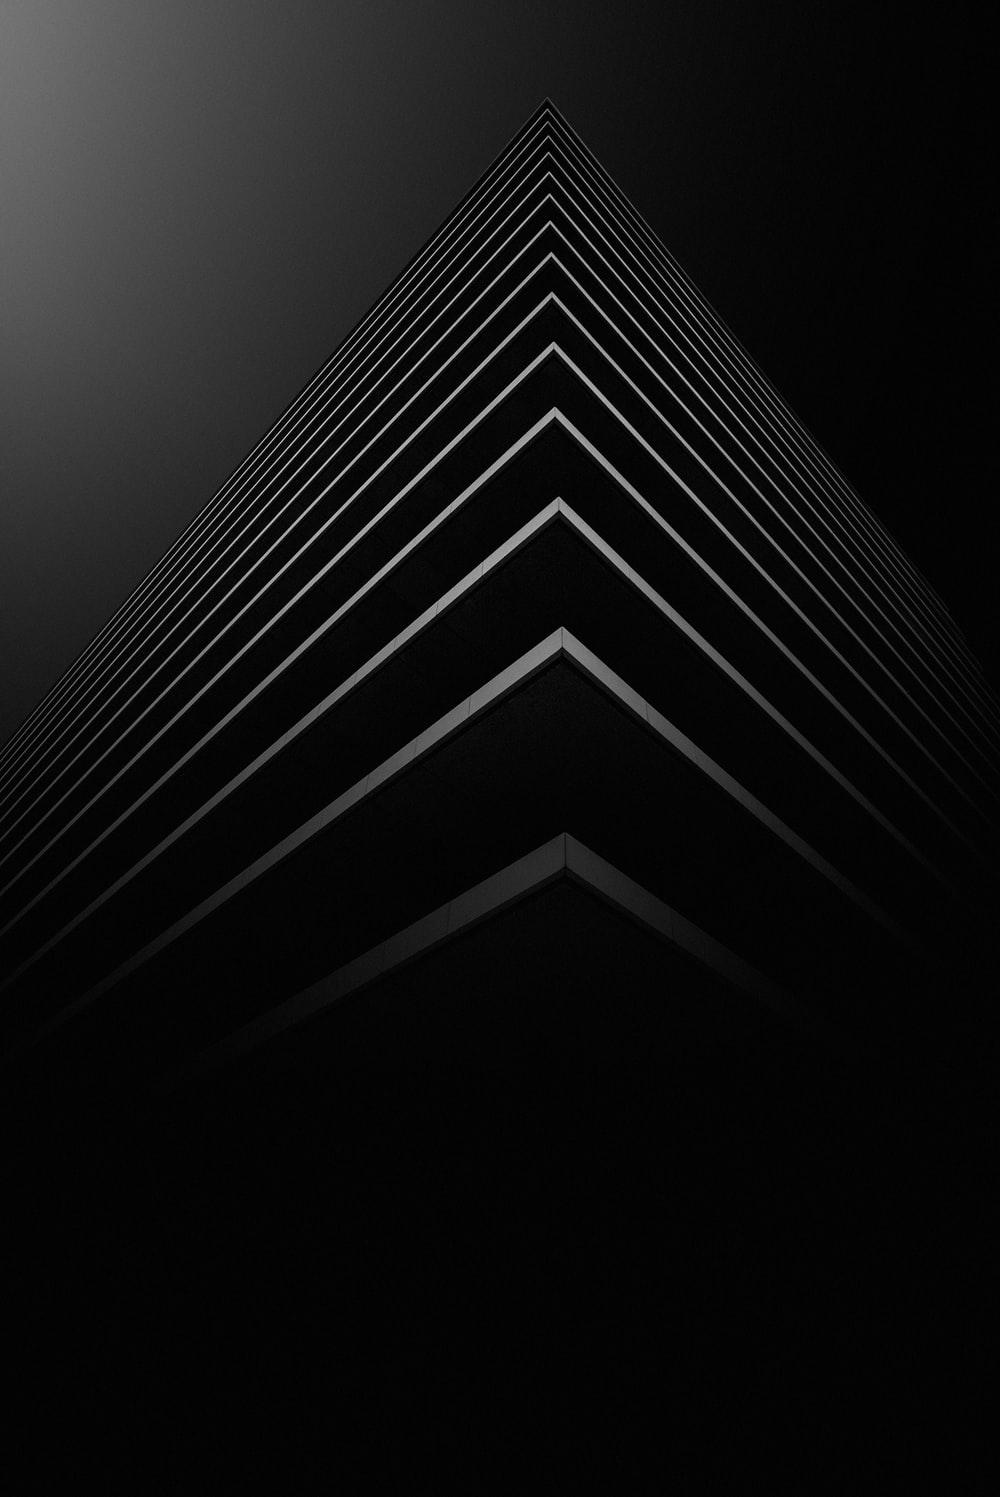 Abstract Dark Picture. Download Free Image